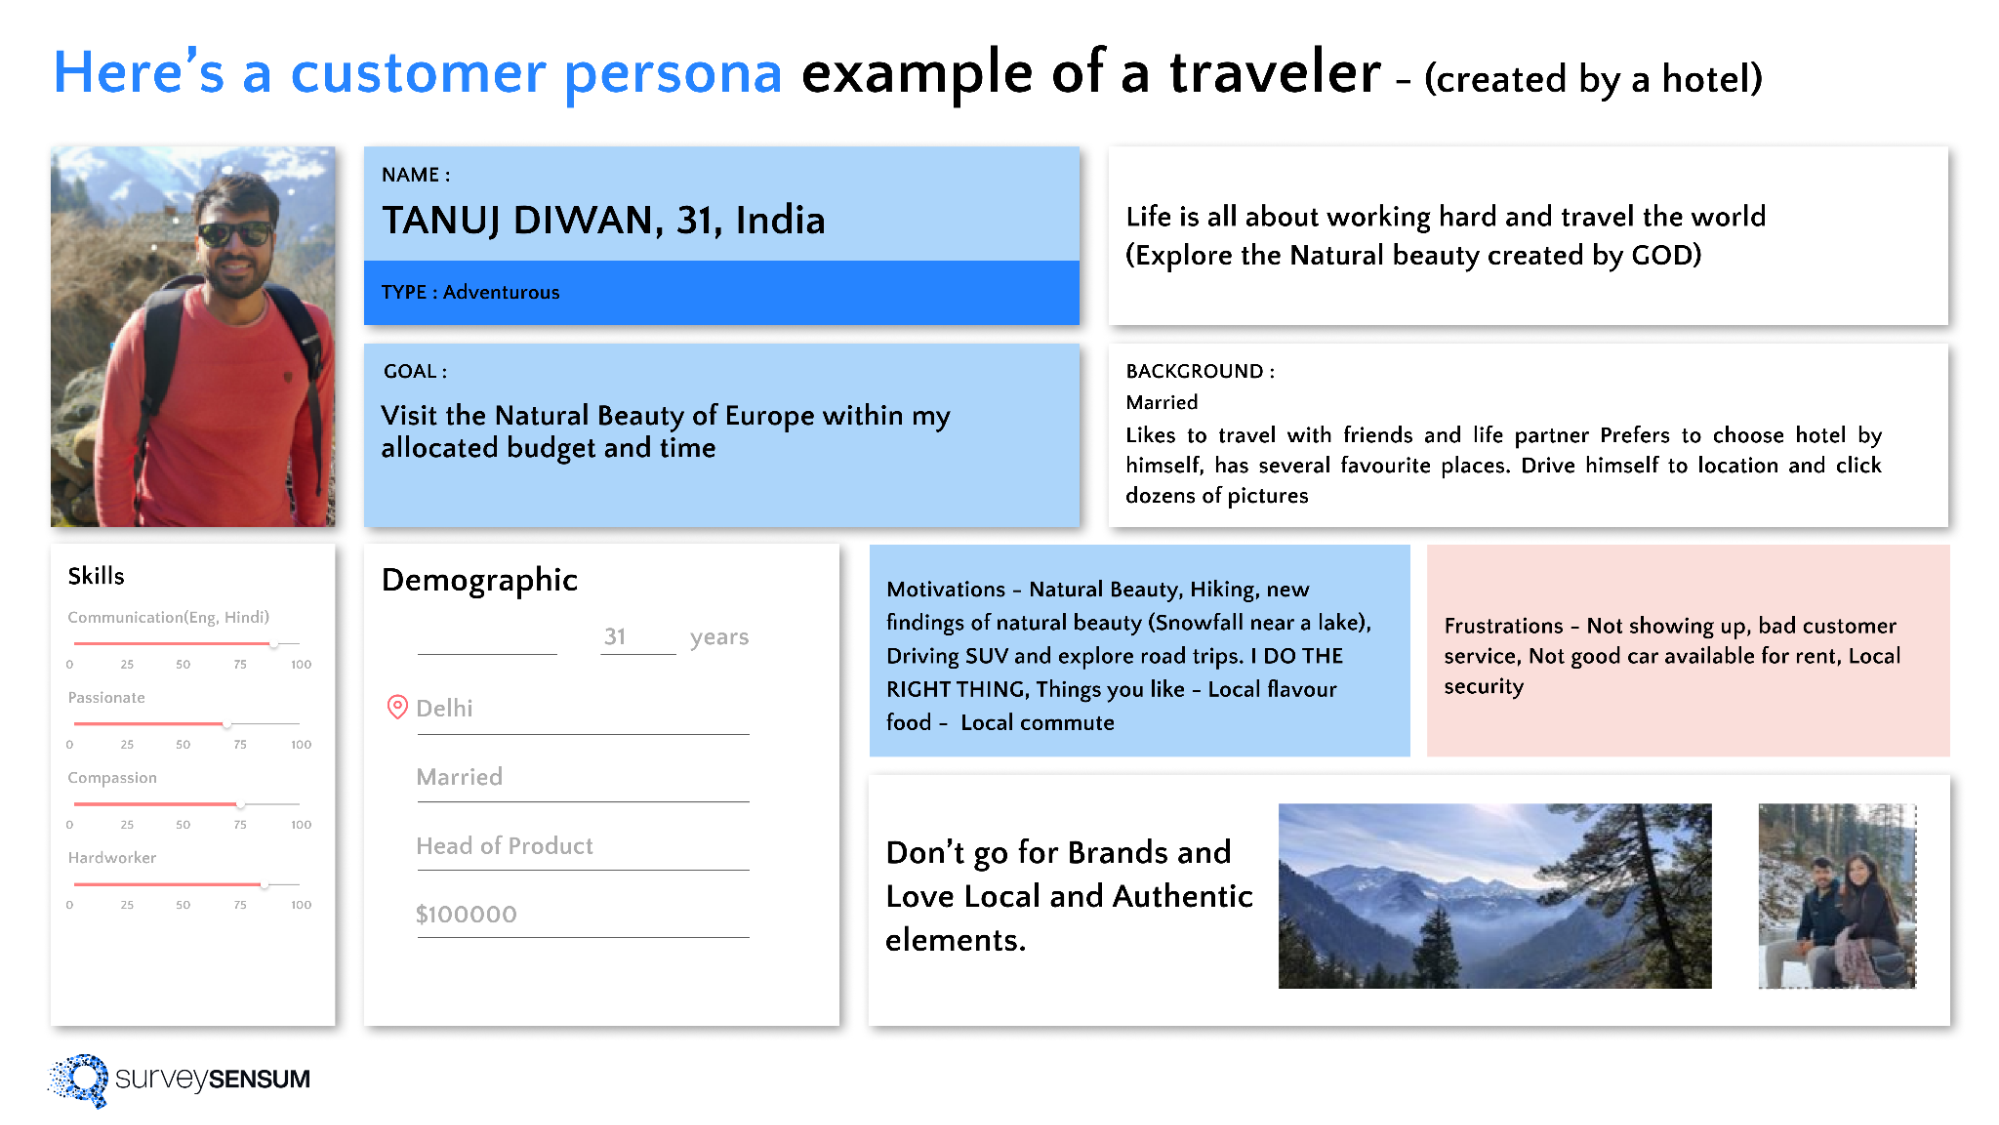 the image shows the ideal customer persona profile of a user called Tanuj Diwan, created by a hotel as an example of a traveler. 